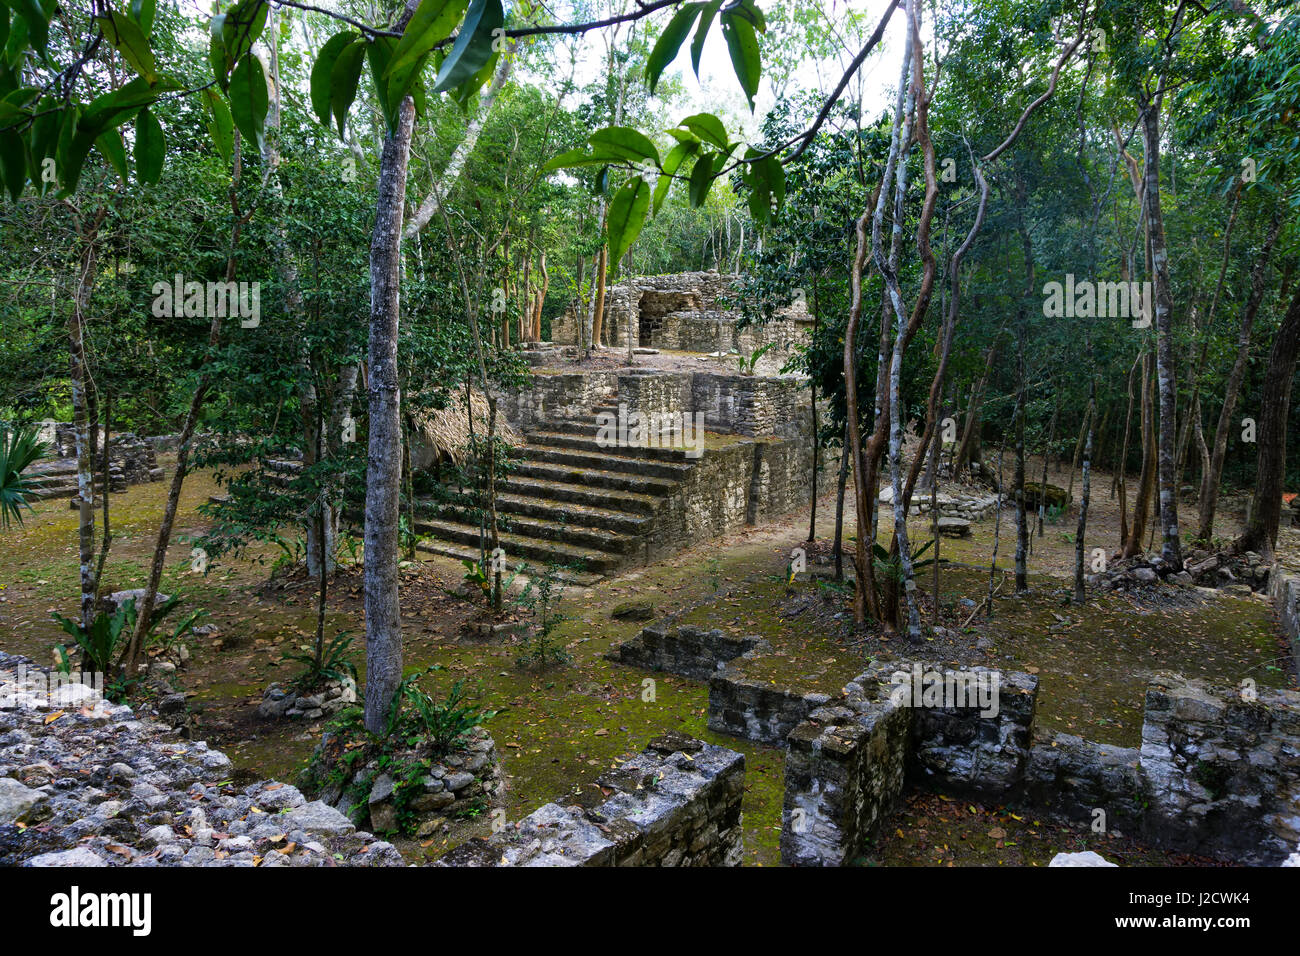 Mayan ruins in Coba, Mexico surrounded by jungle Stock Photo